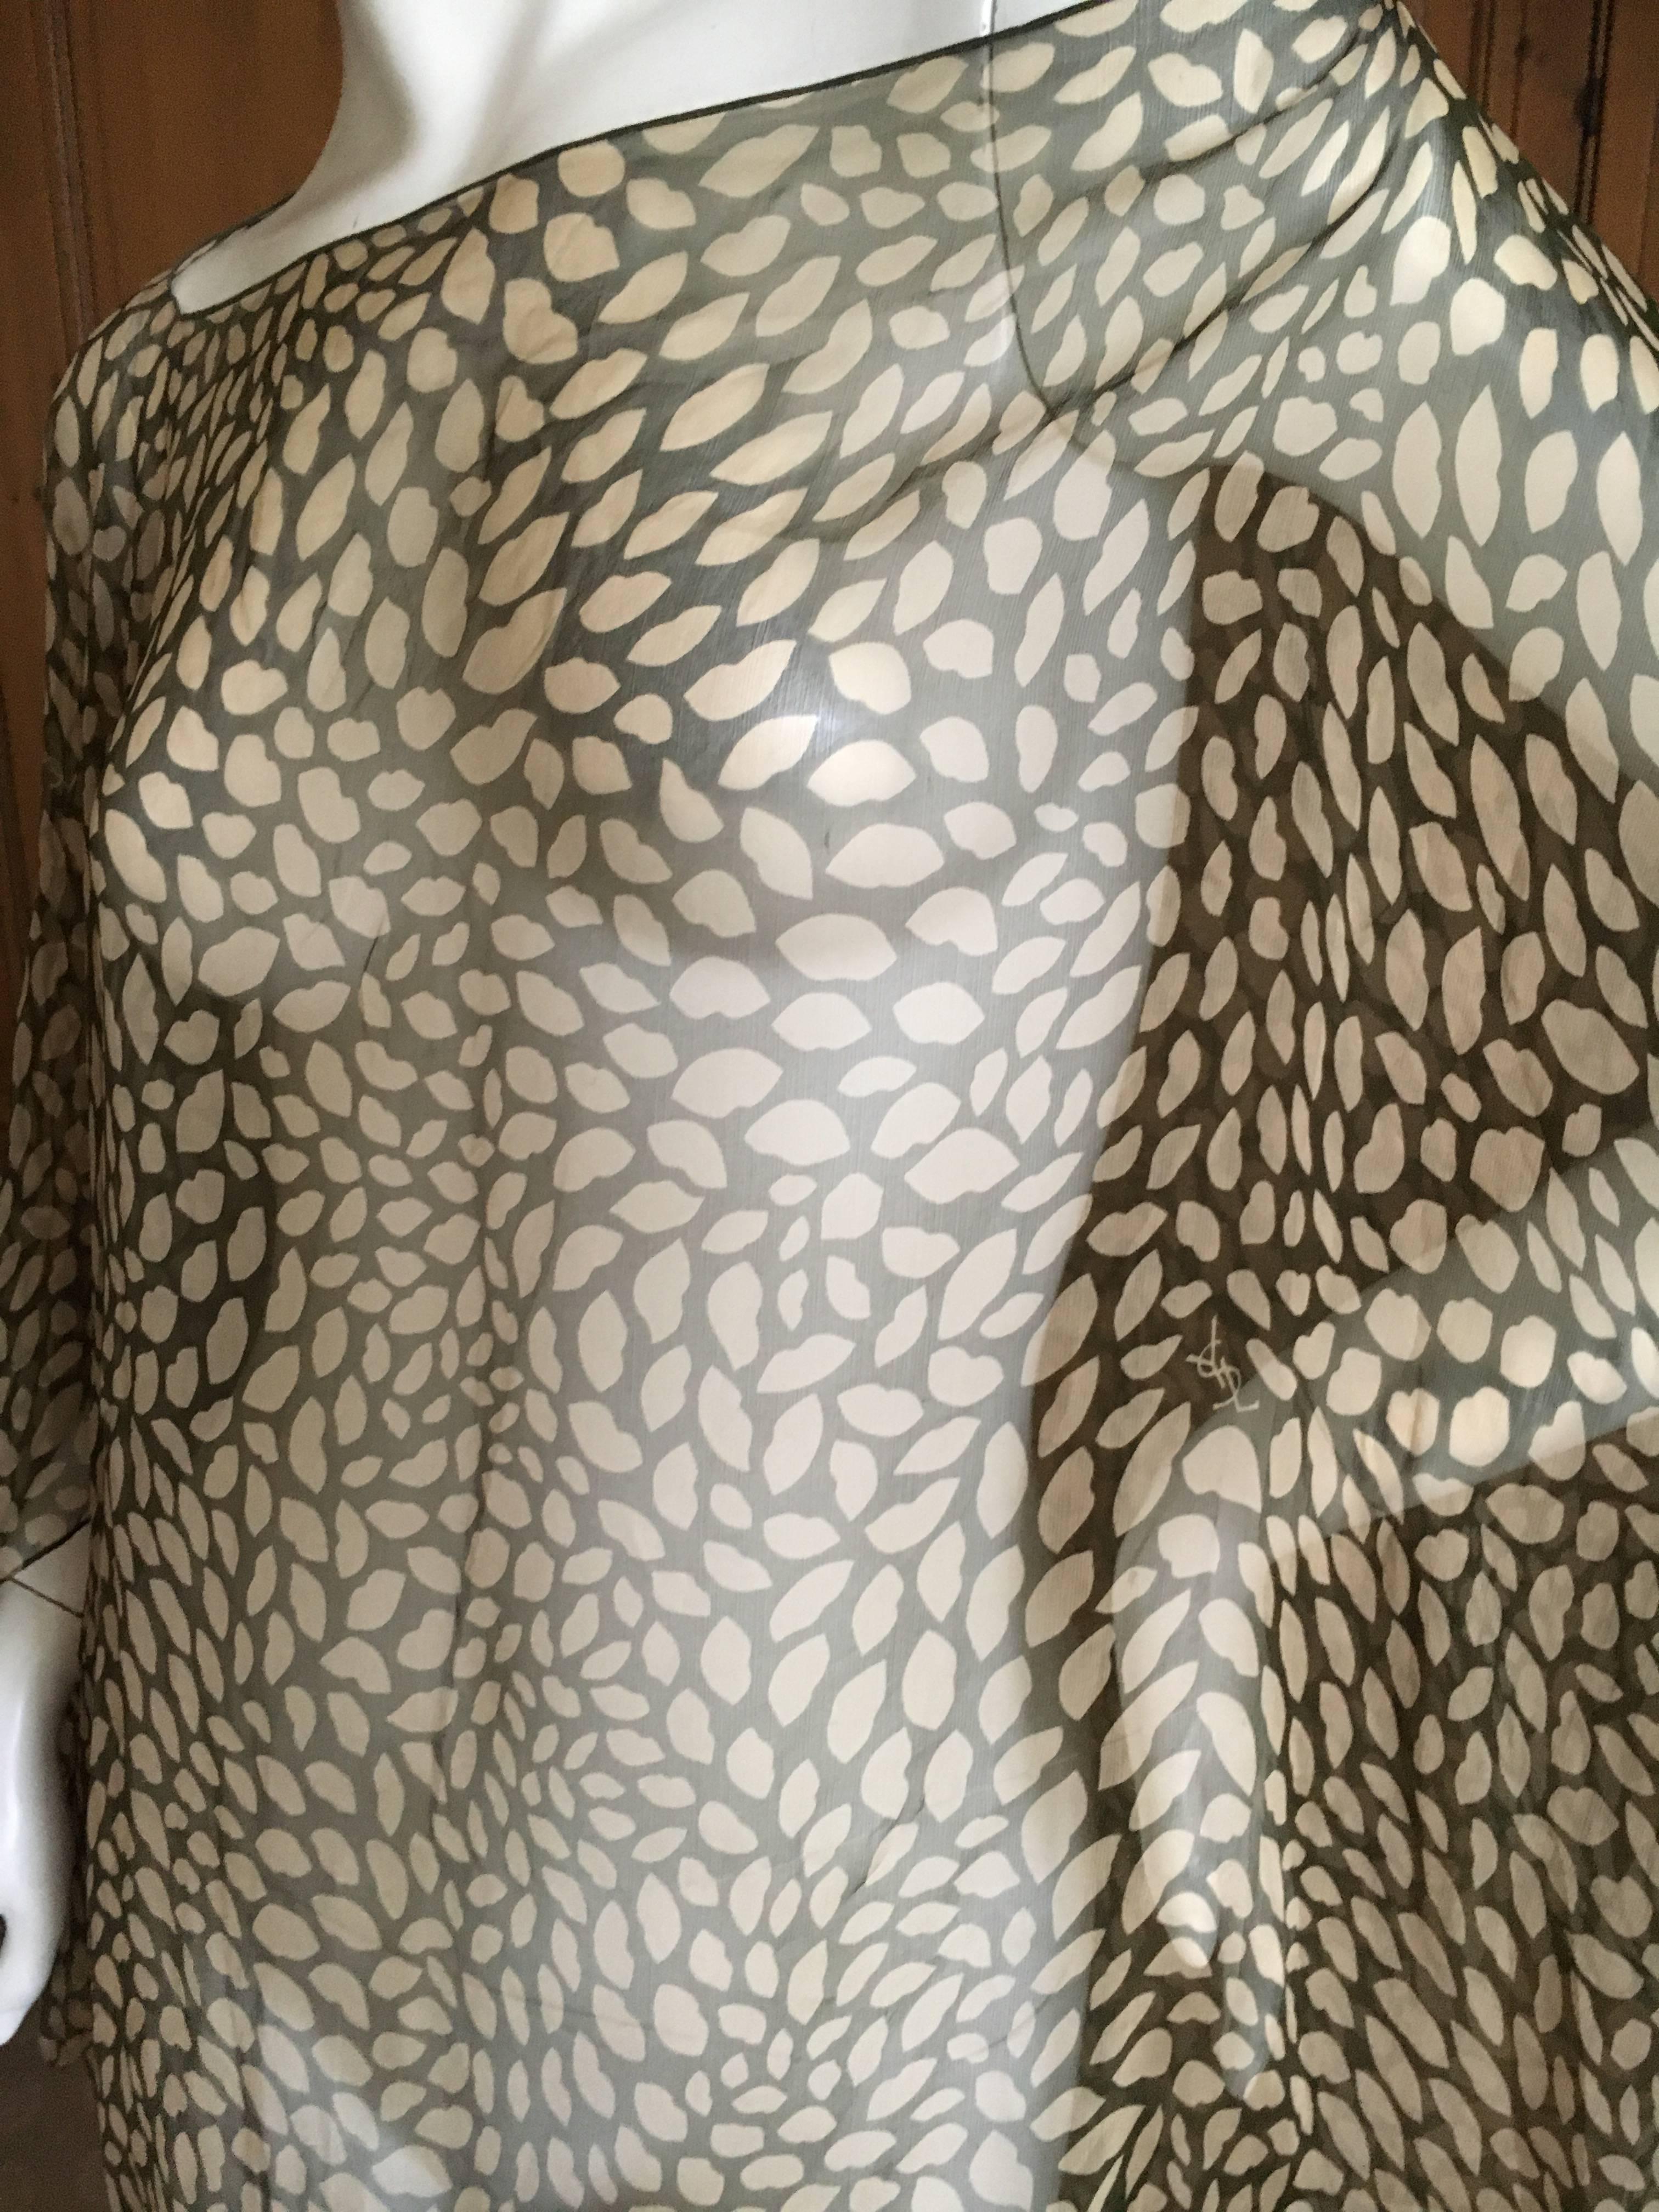 Yves Saint Laurent Sheer Silk Chiffon Lips Print Poncho In Excellent Condition For Sale In Cloverdale, CA